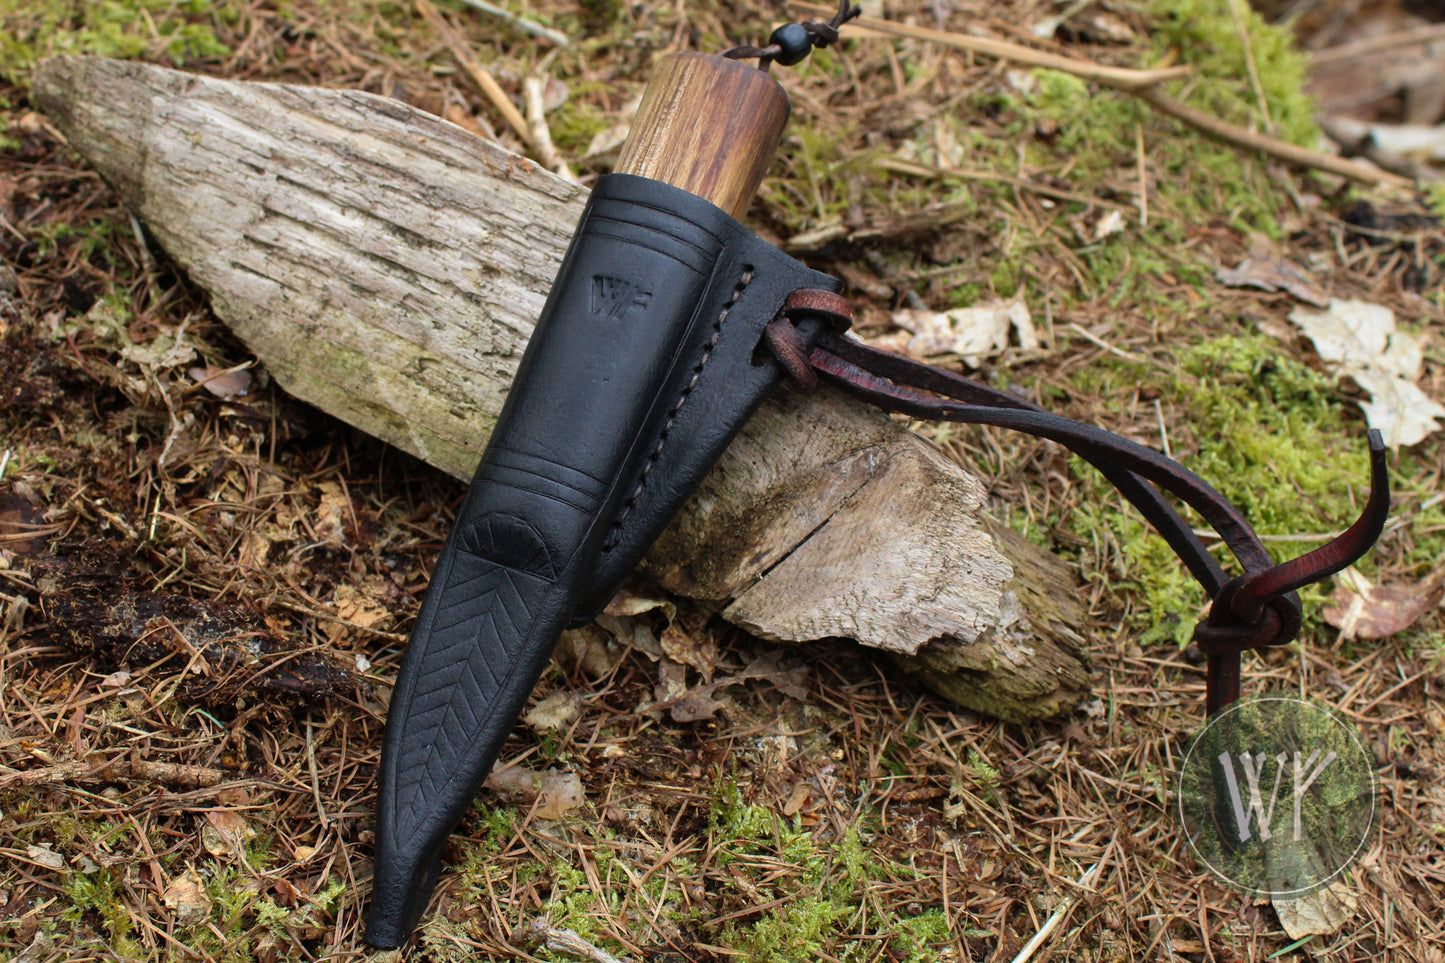 Historical reproduction of Viking age Mästermyr Knife. Hand forged from Bloomery Steel with Spalted Ash handle